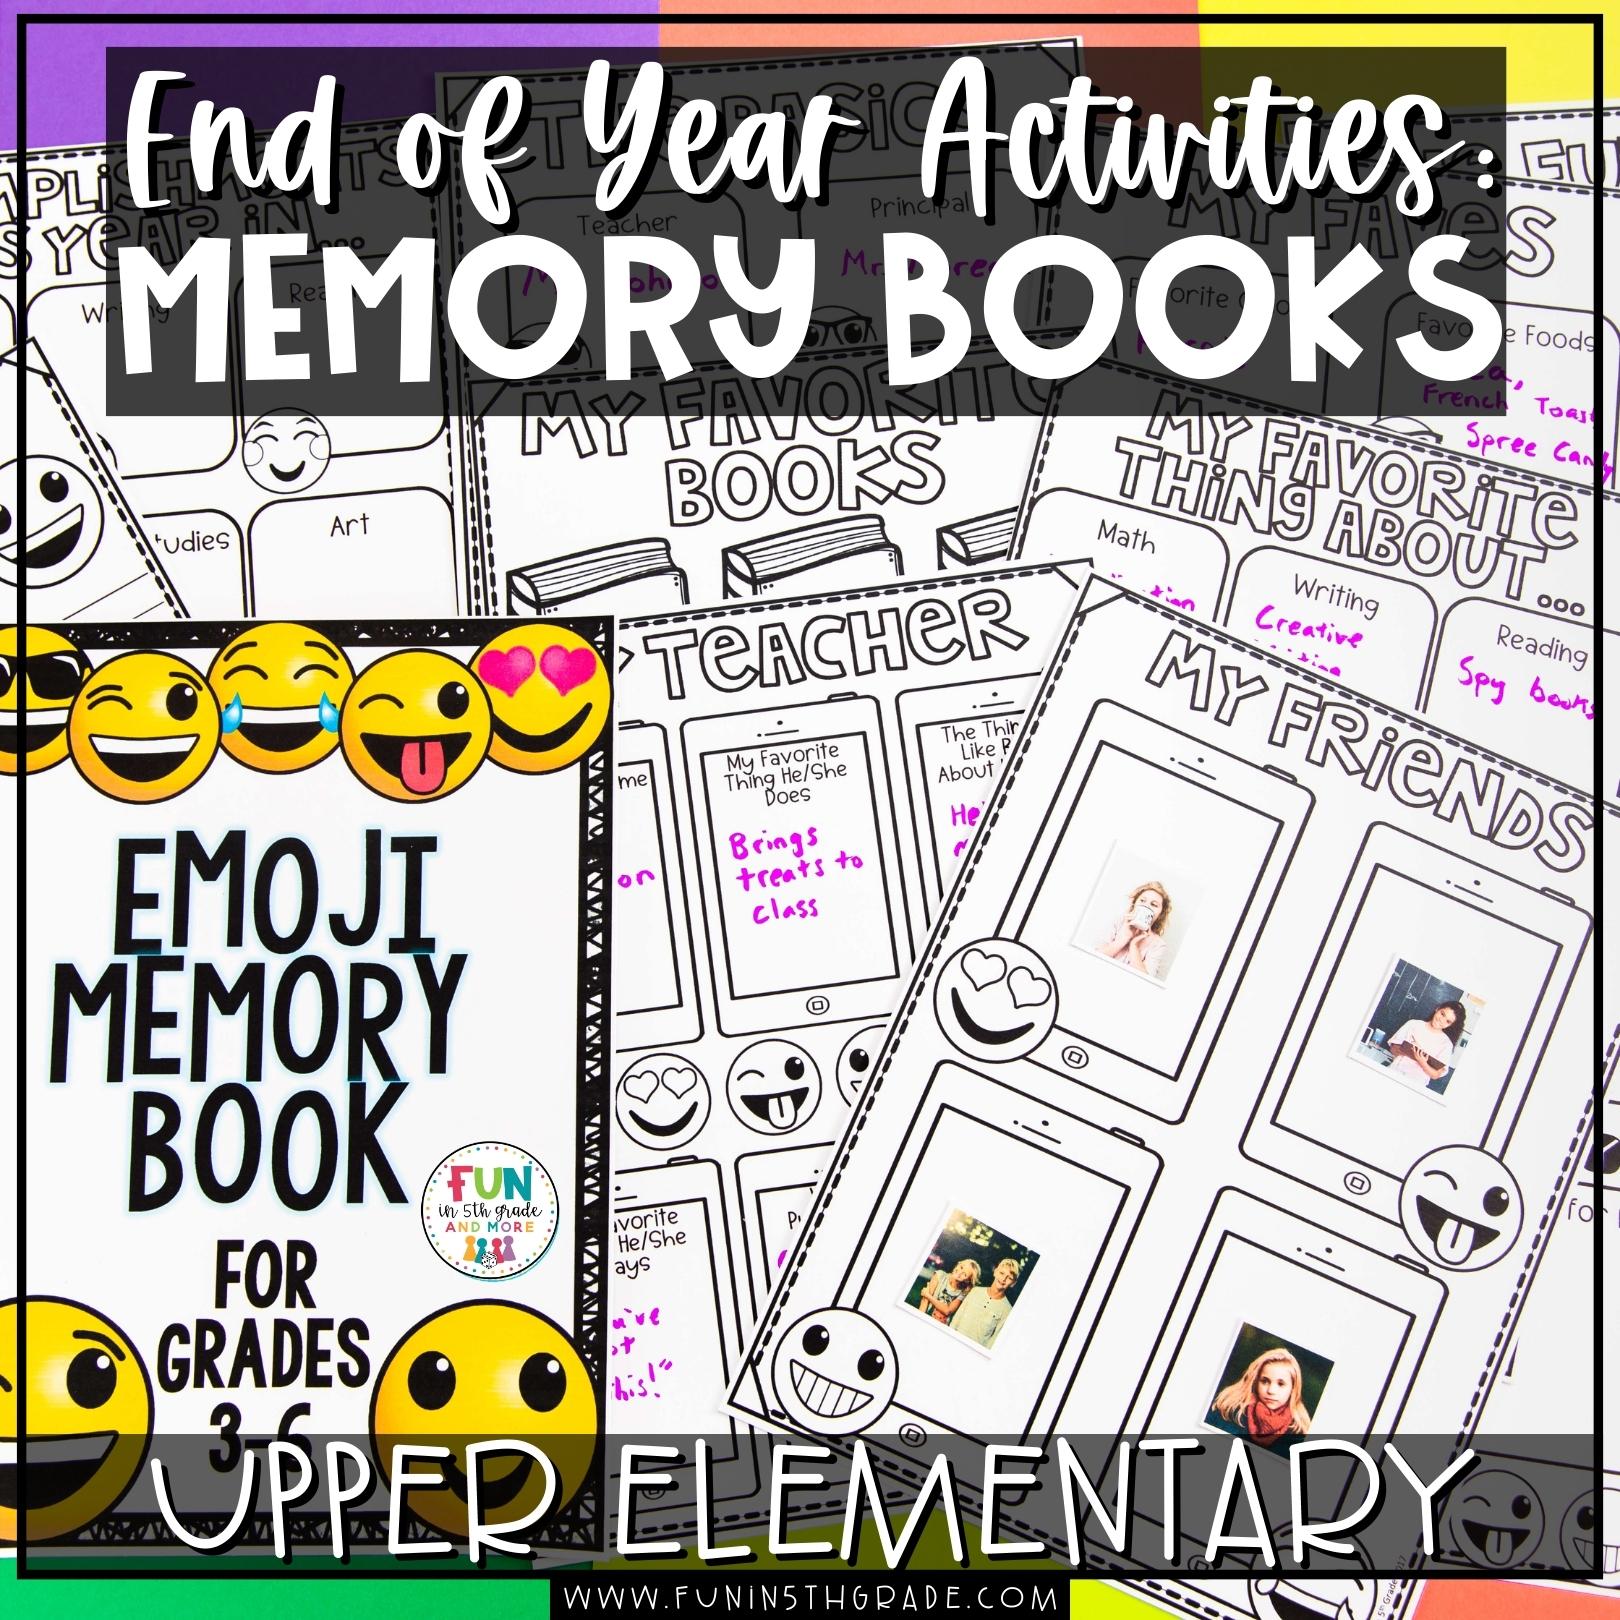 End of Year Activities: Memory Books